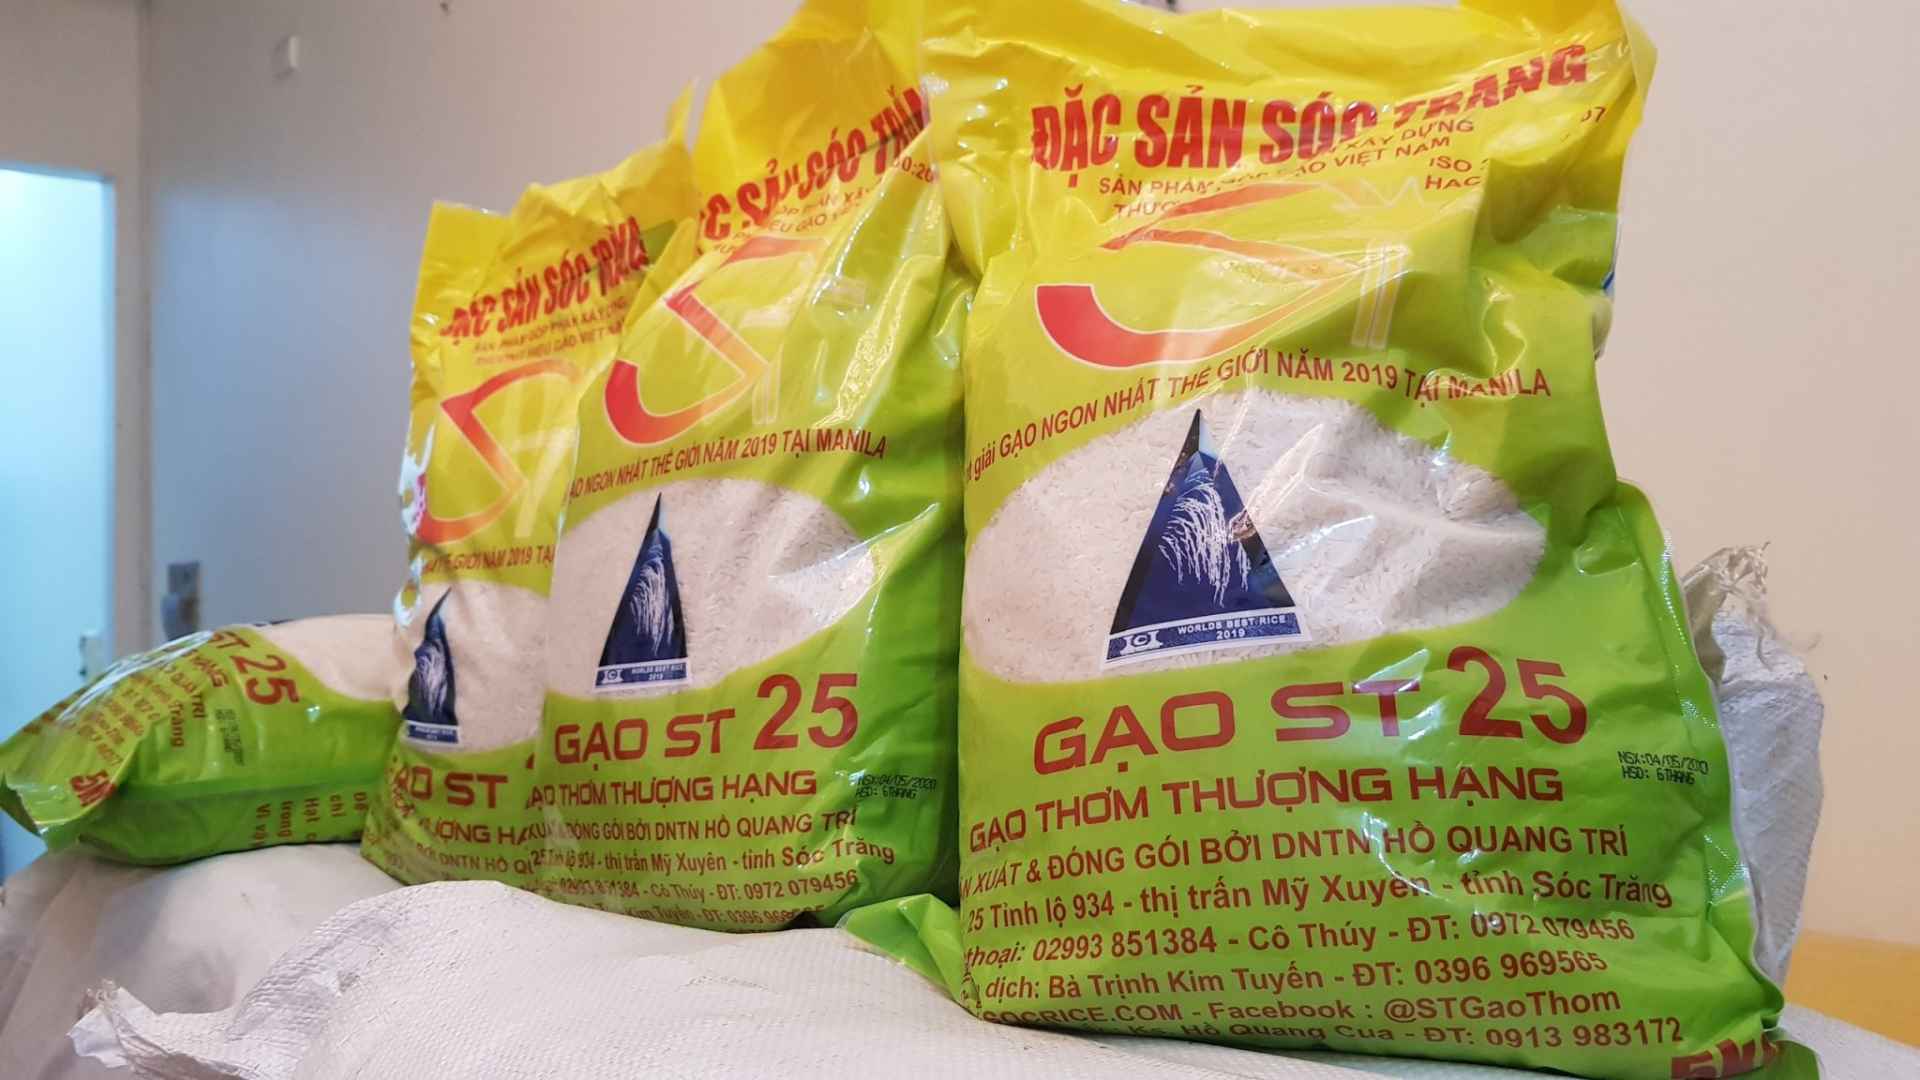 Foreign firms register trademark protection for Vietnamese rice in U.S